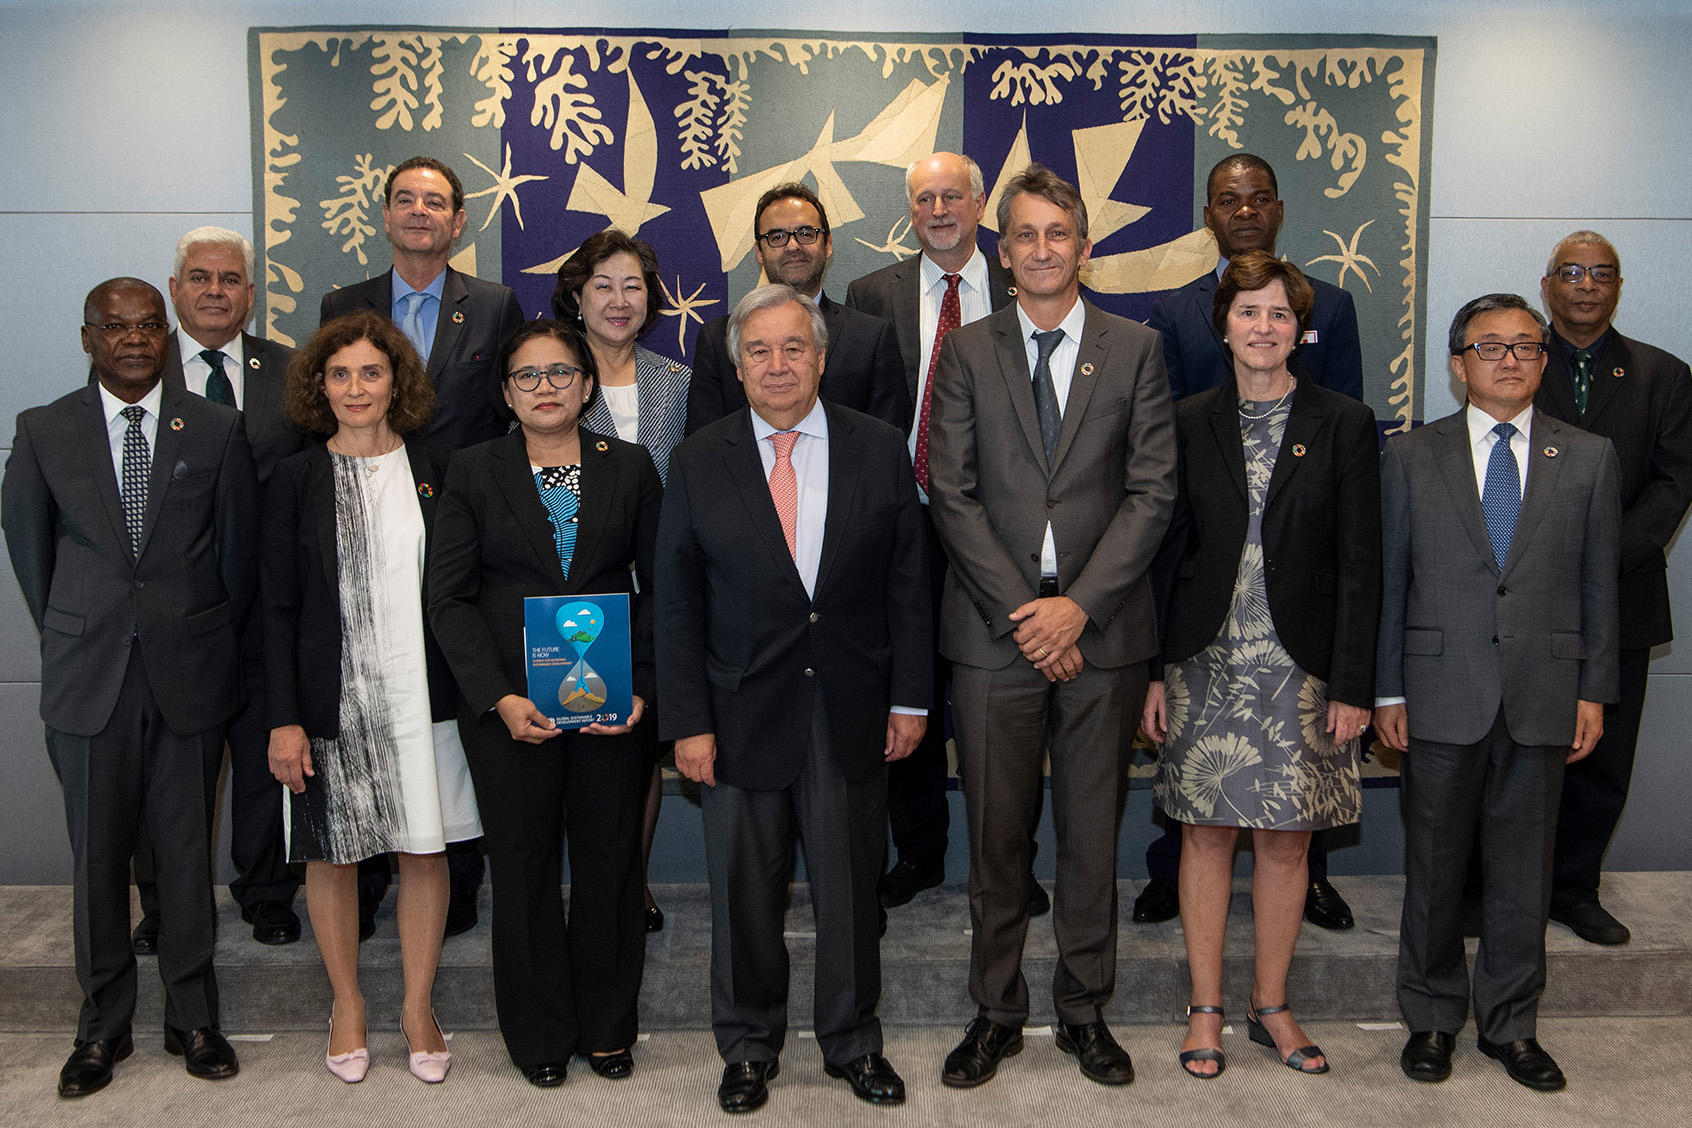 UN Secretary-General Guterres and panel of experts on sustainable development